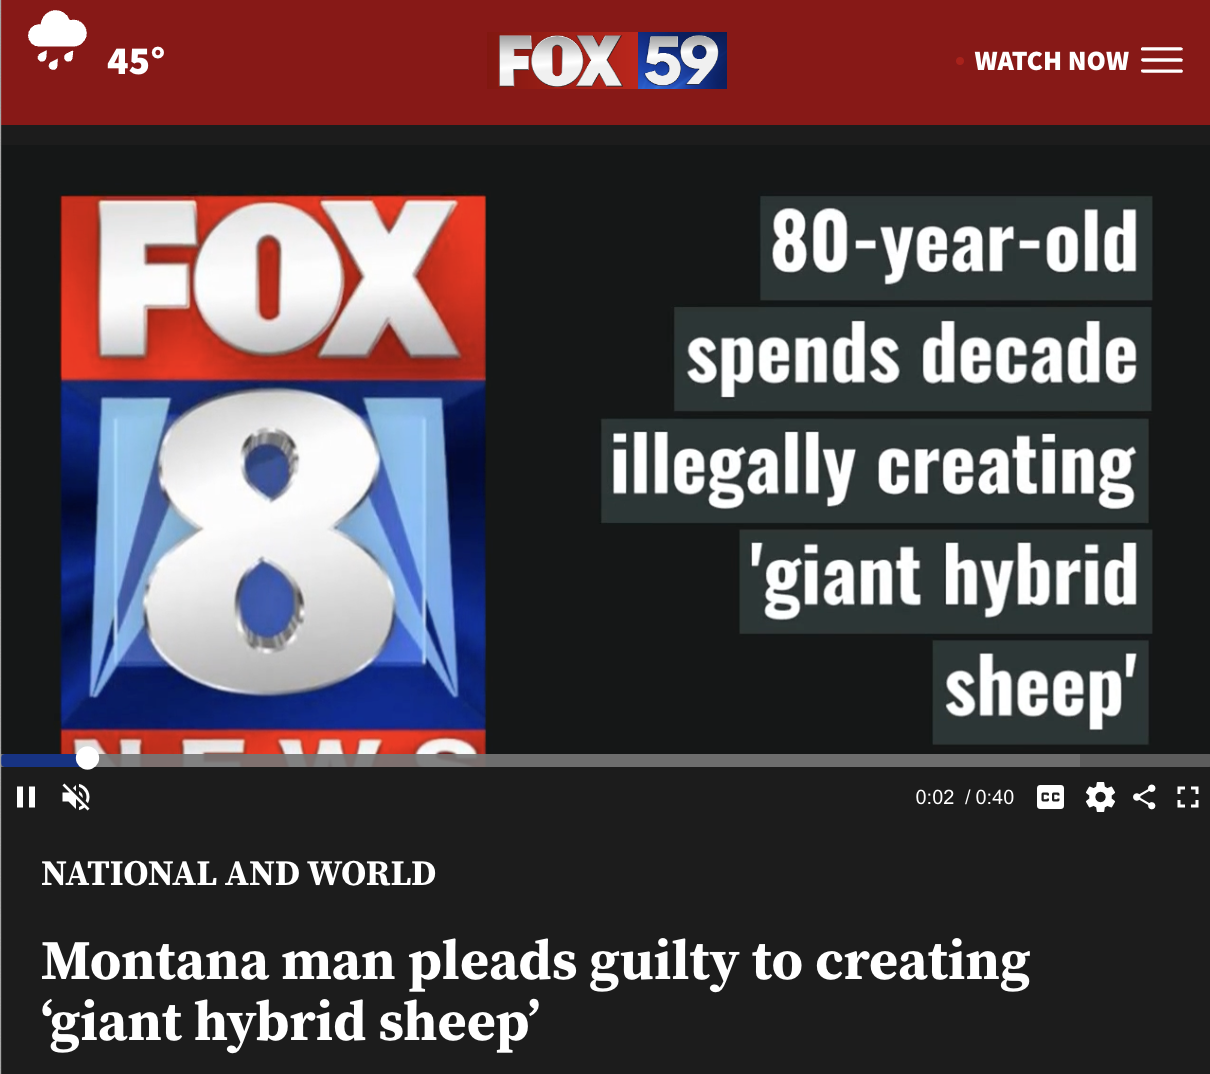 fox 13 utah - 45 Fox 59 Watch Now Fox 8 80yearold spends decade illegally creating 'giant hybrid sheep' National And World Montana man pleads guilty to creating 'giant hybrid sheep'